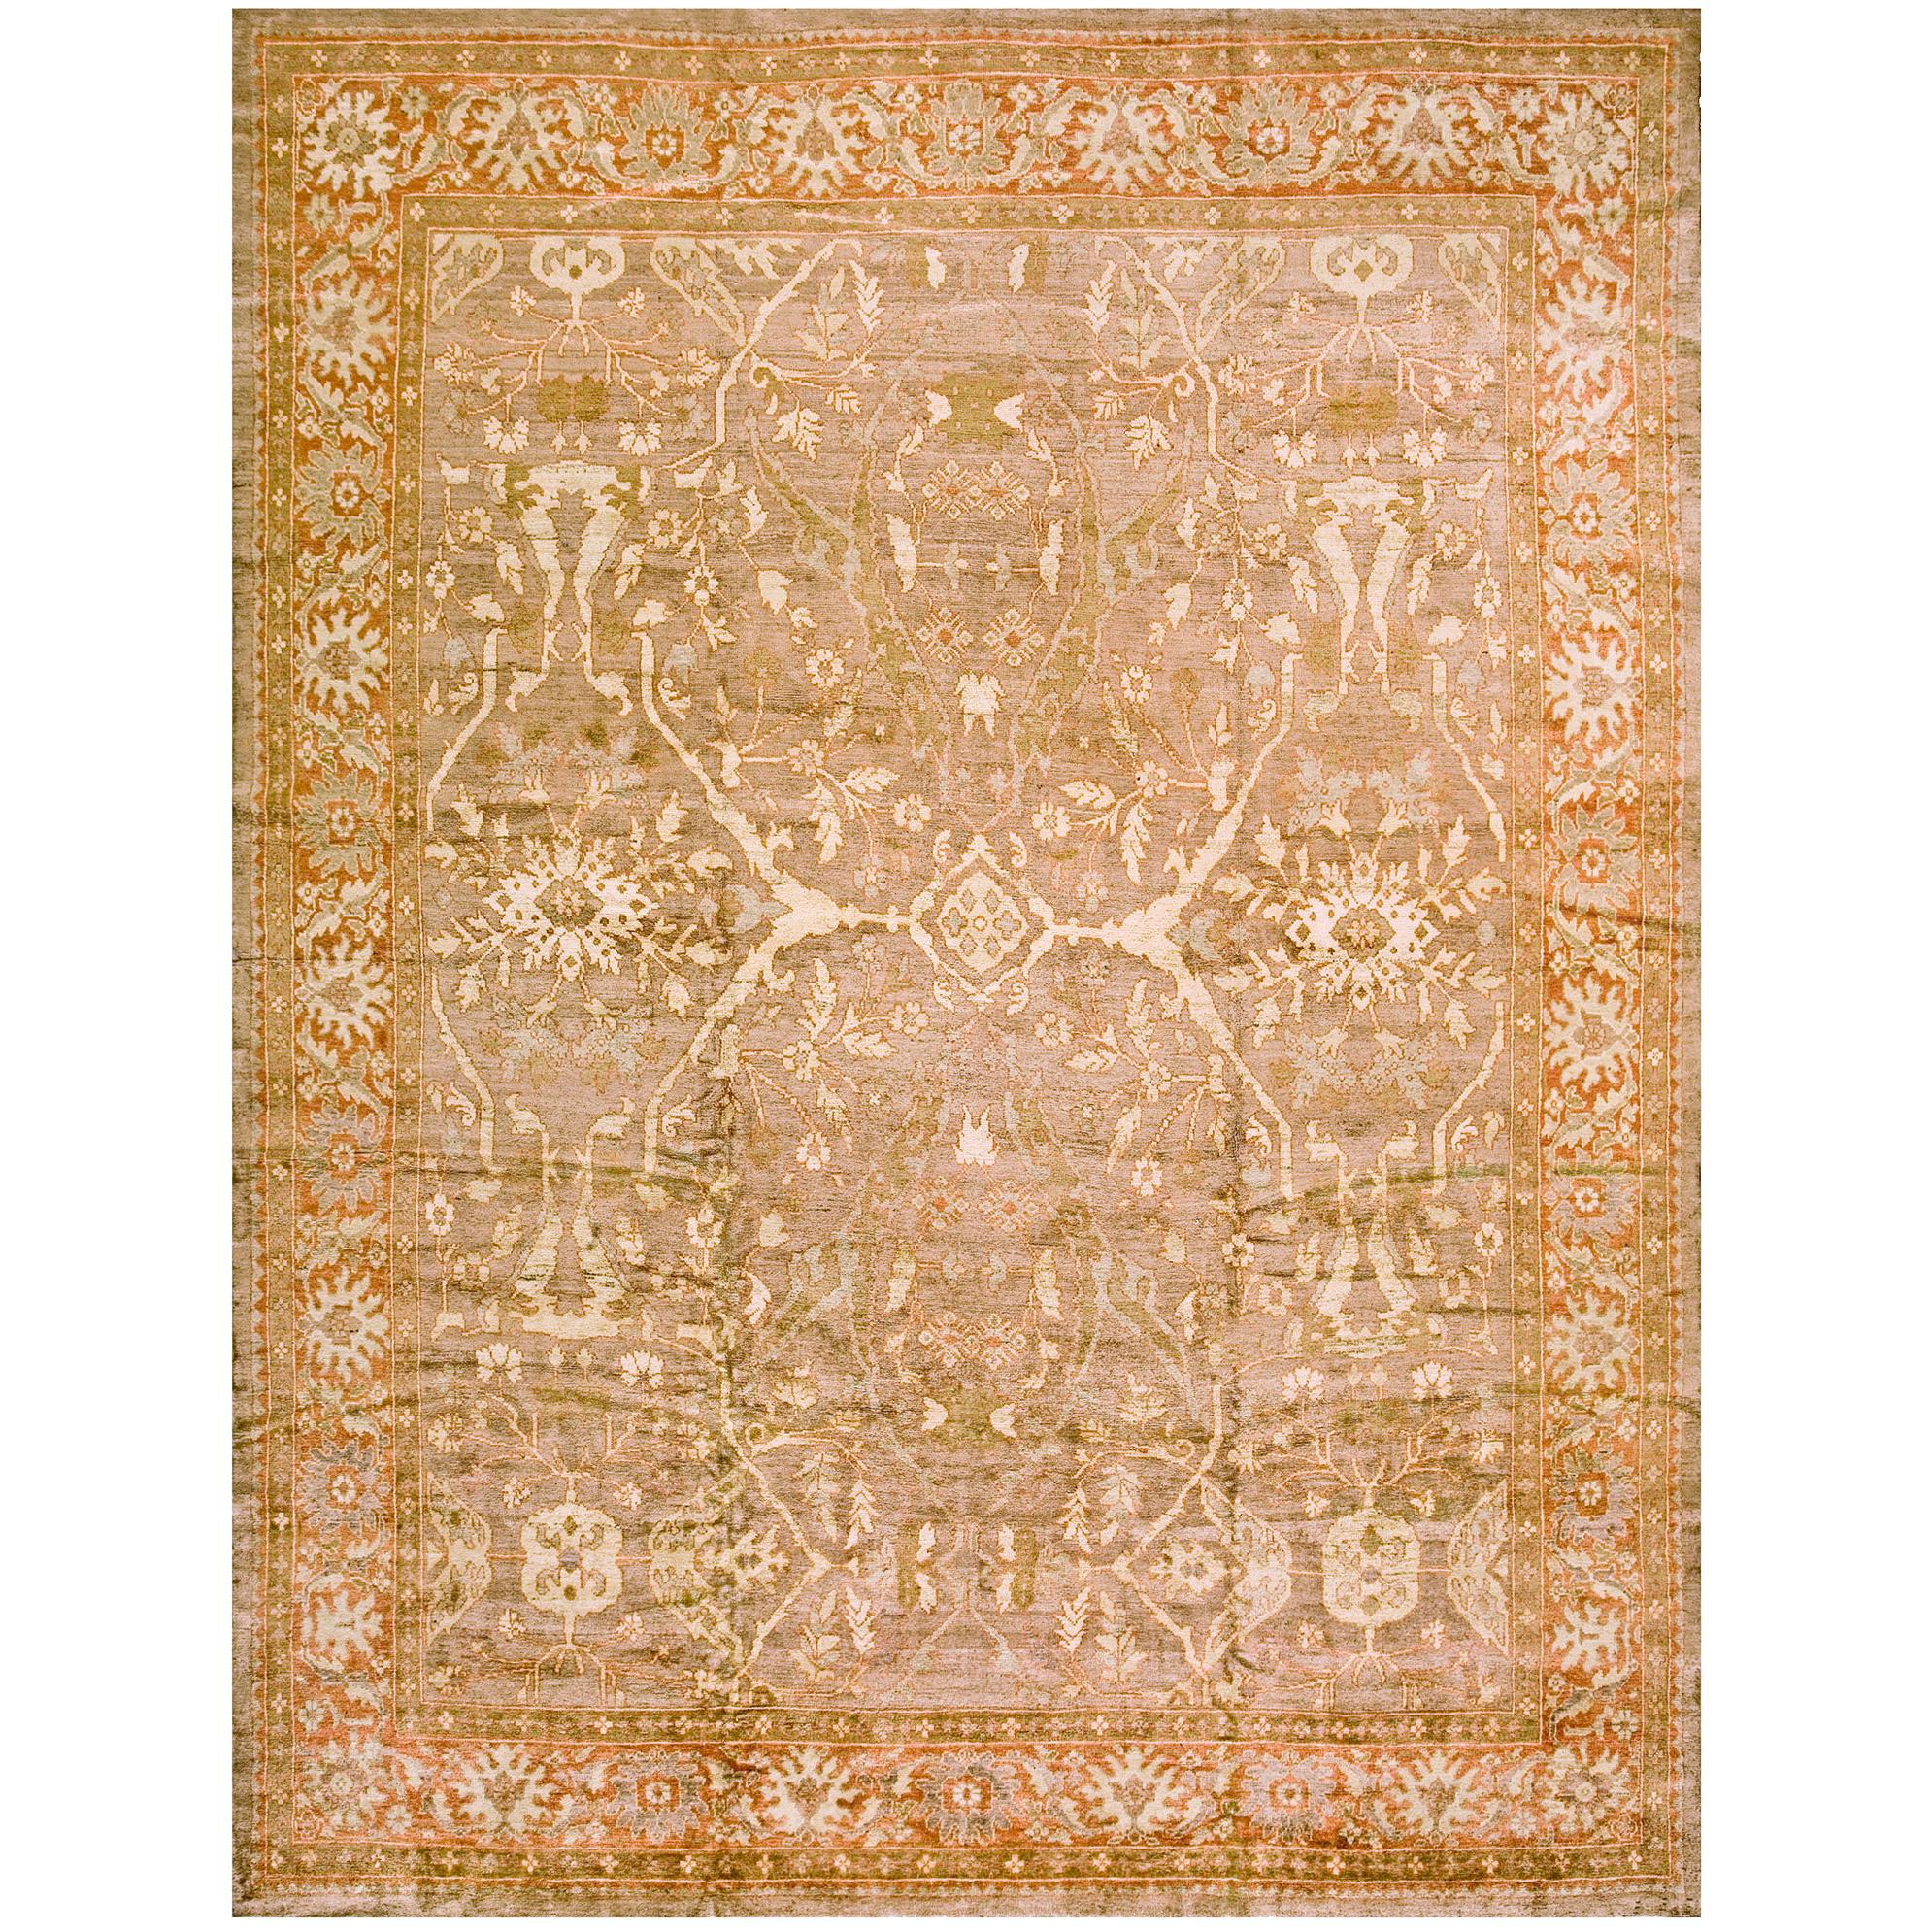 Late 19th Persian Sultanabad Carpet ( 10'4"x 134" - 315 x 406 ) For Sale